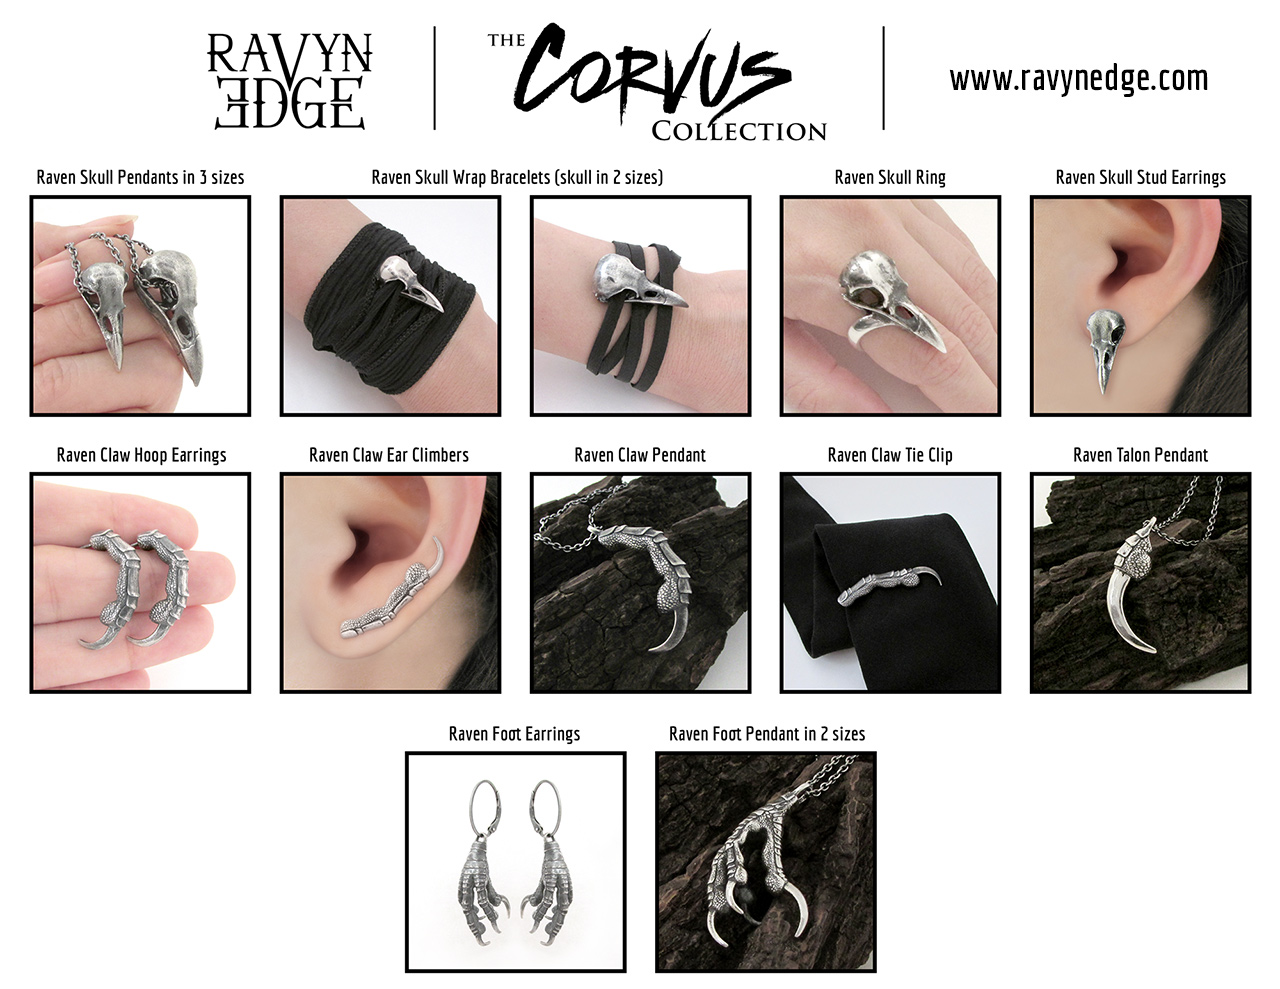 Tiffany J. Tinsley of RavynEdge is Set to Wow Jewelry Lovers with Her All-New Signature Line of Jewelry, The Corvus Collection